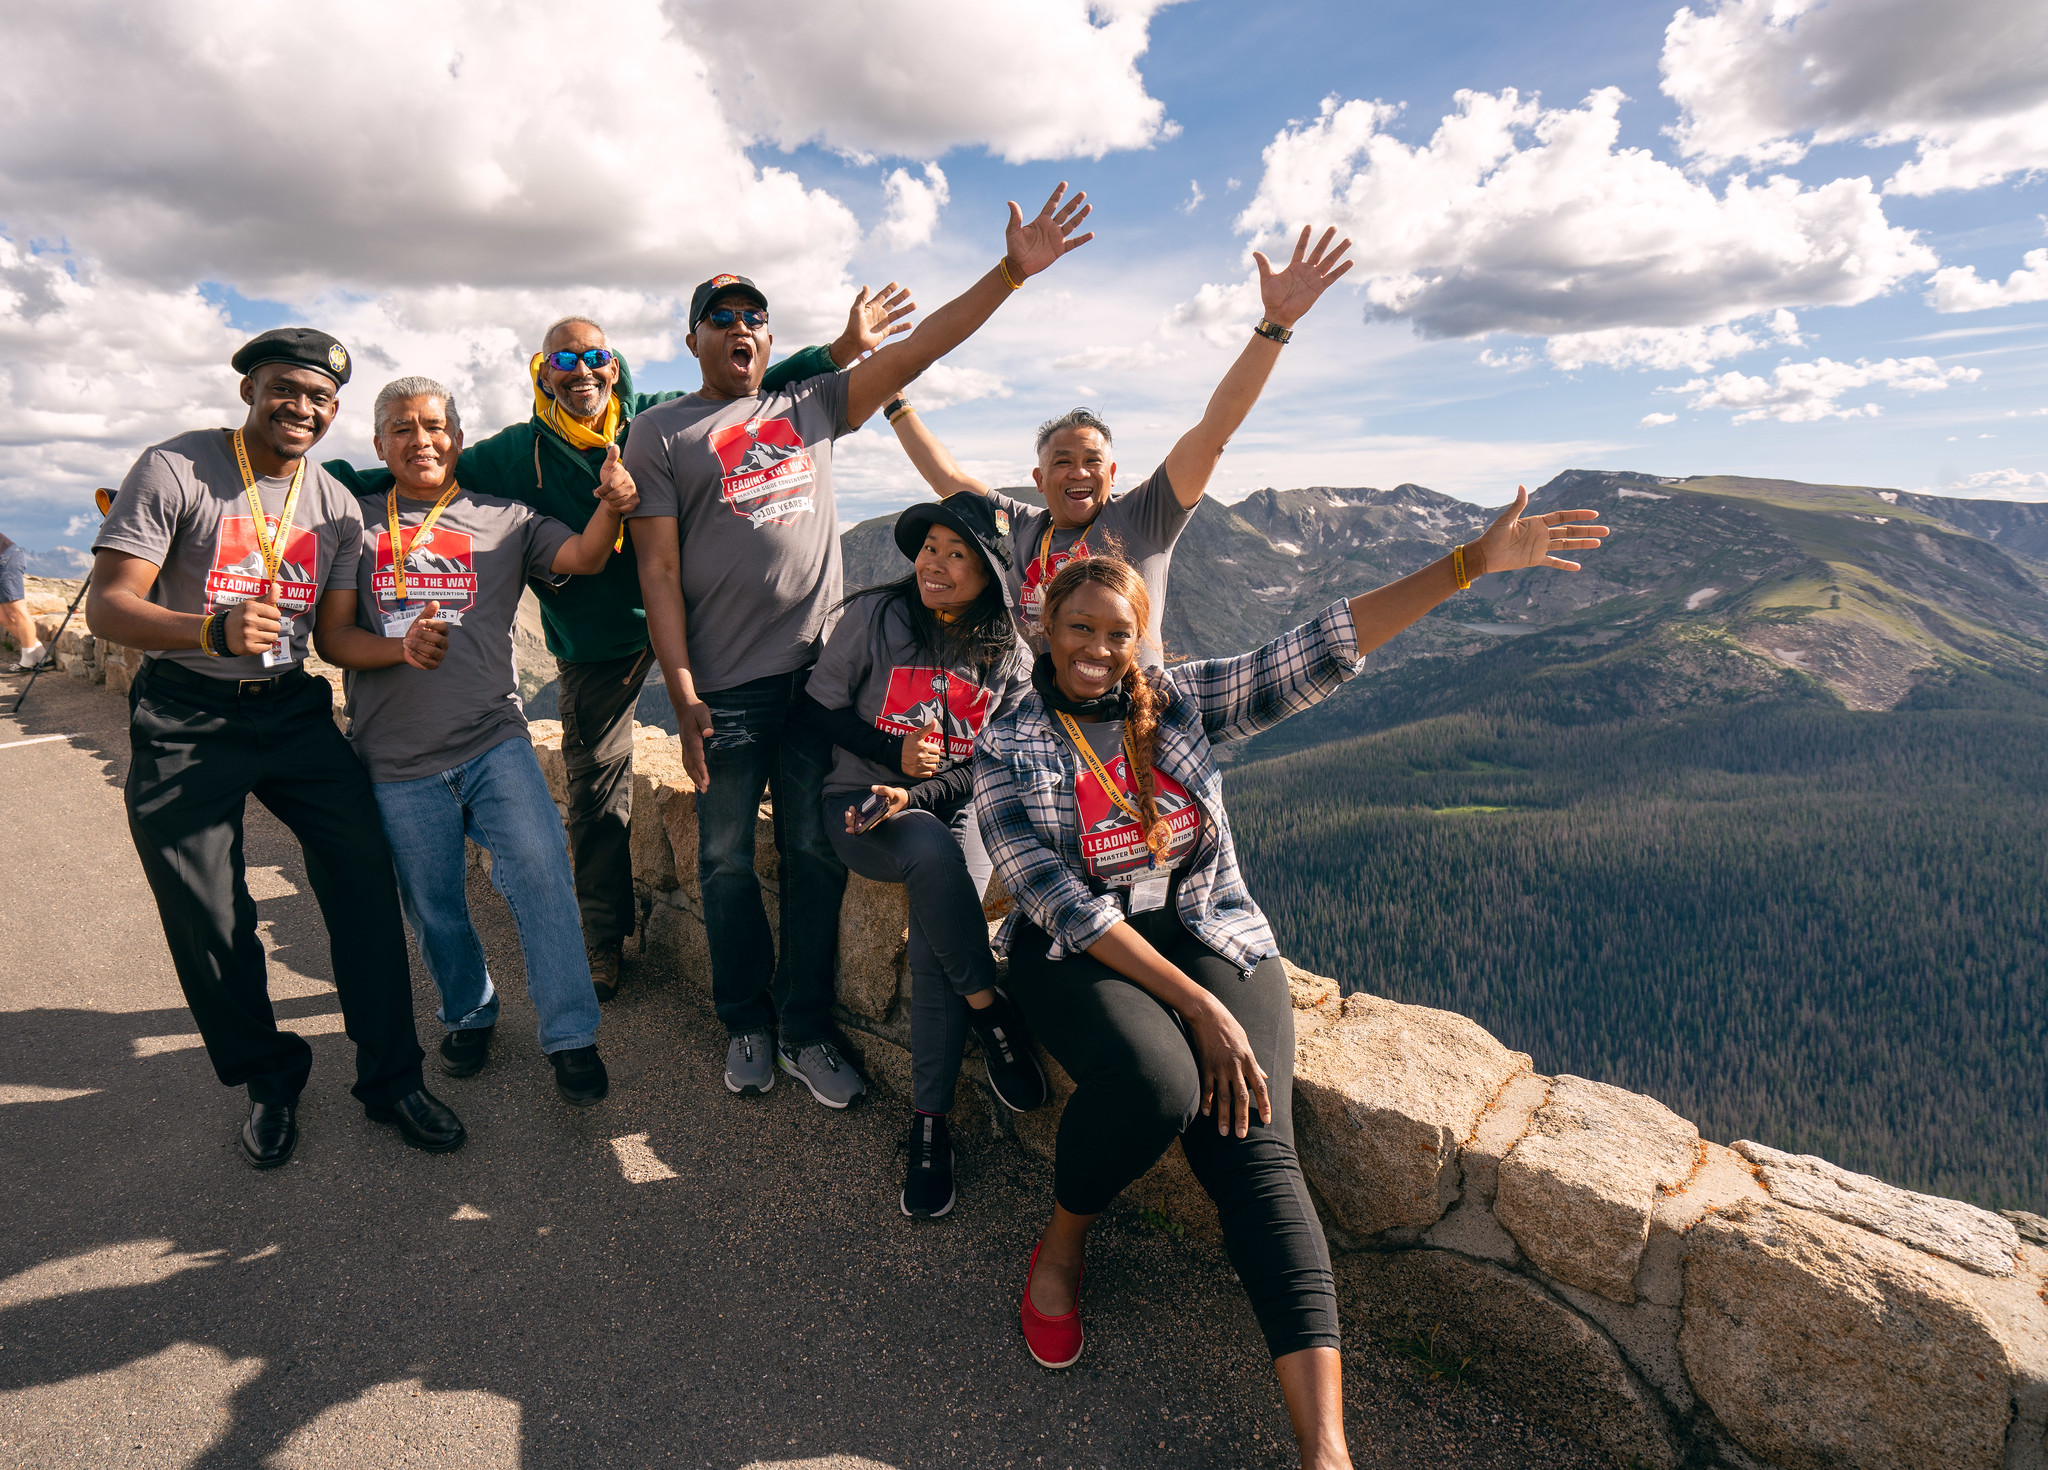 A group of Master Guides wearing the official convention T-shirt celebrate at a mountain viewpoint. Photo by Pieter Damsteegt | North American Division